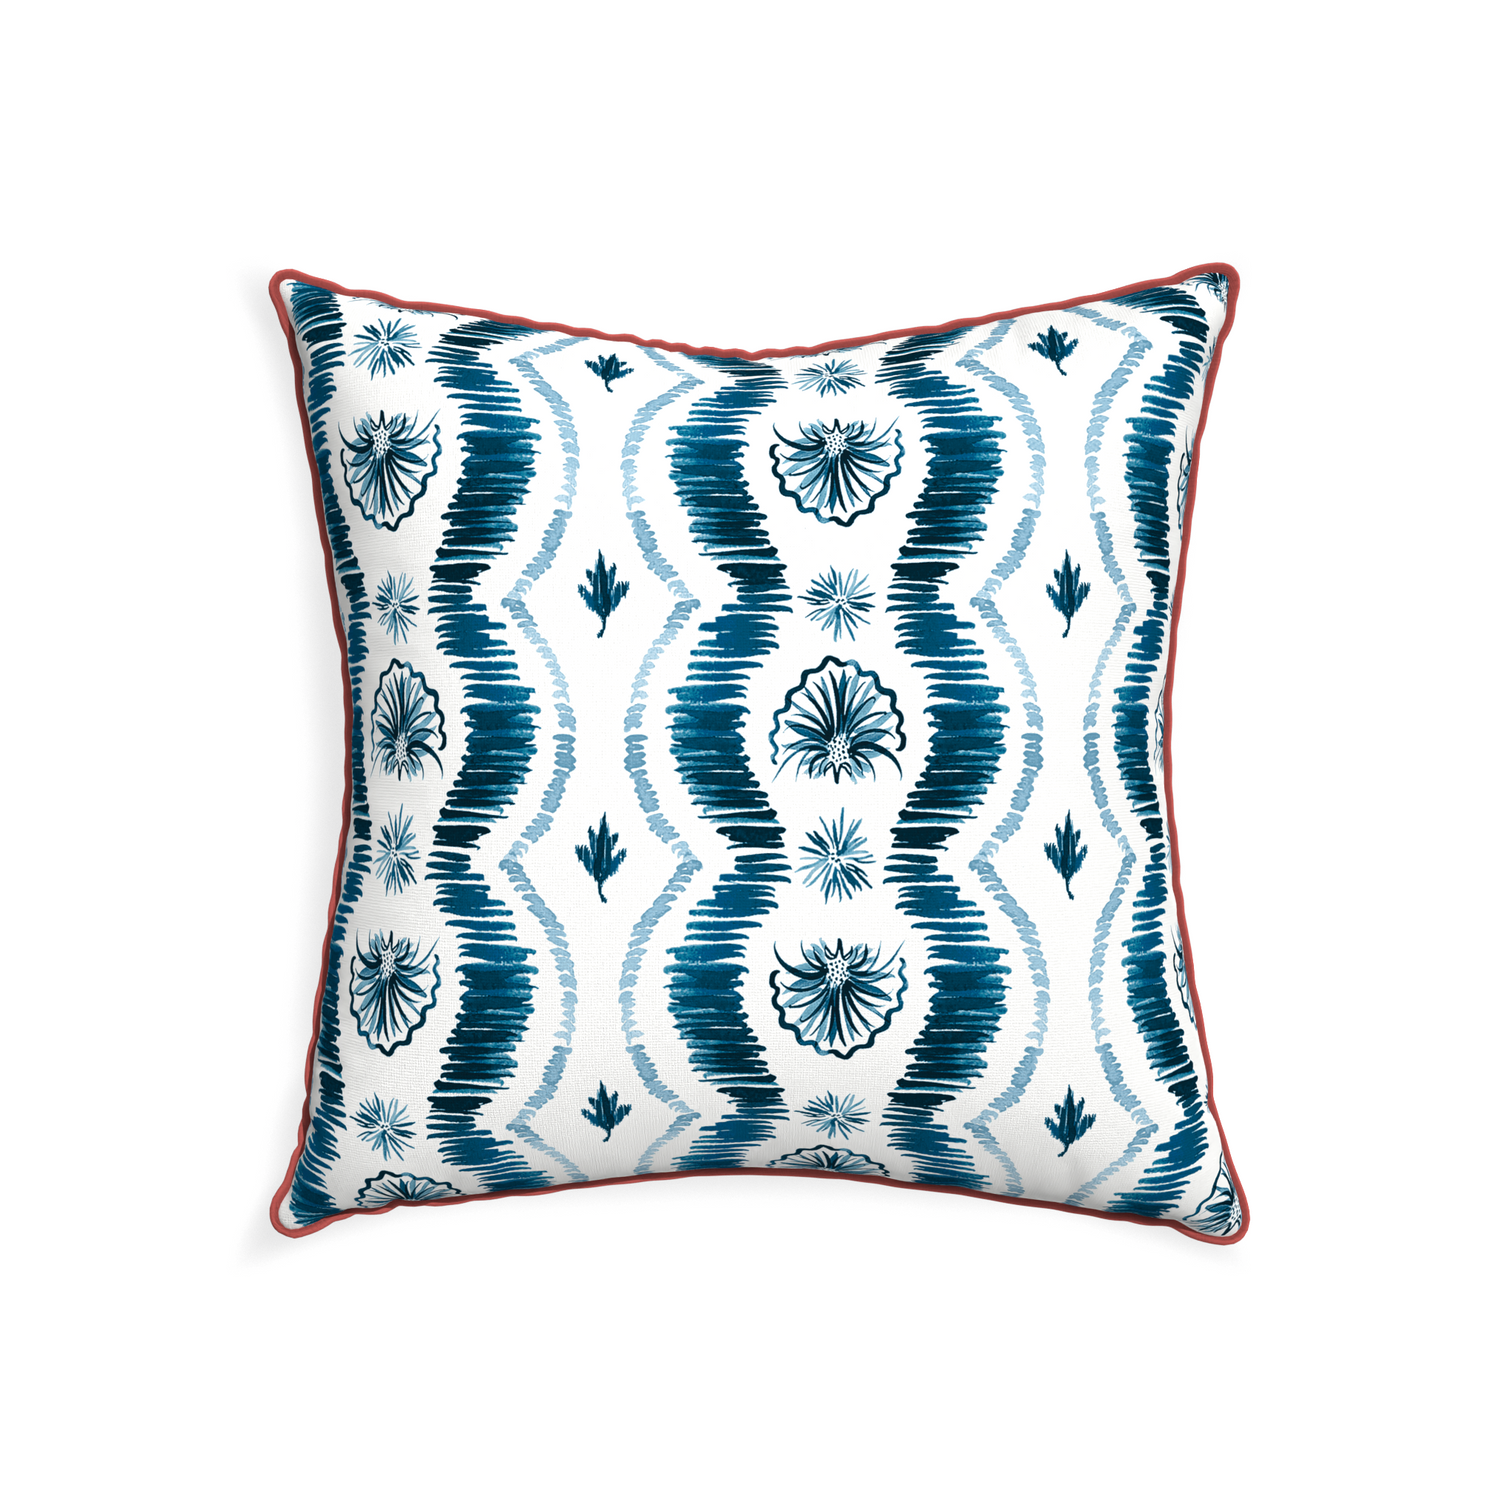 22-square alice custom blue ikatpillow with c piping on white background